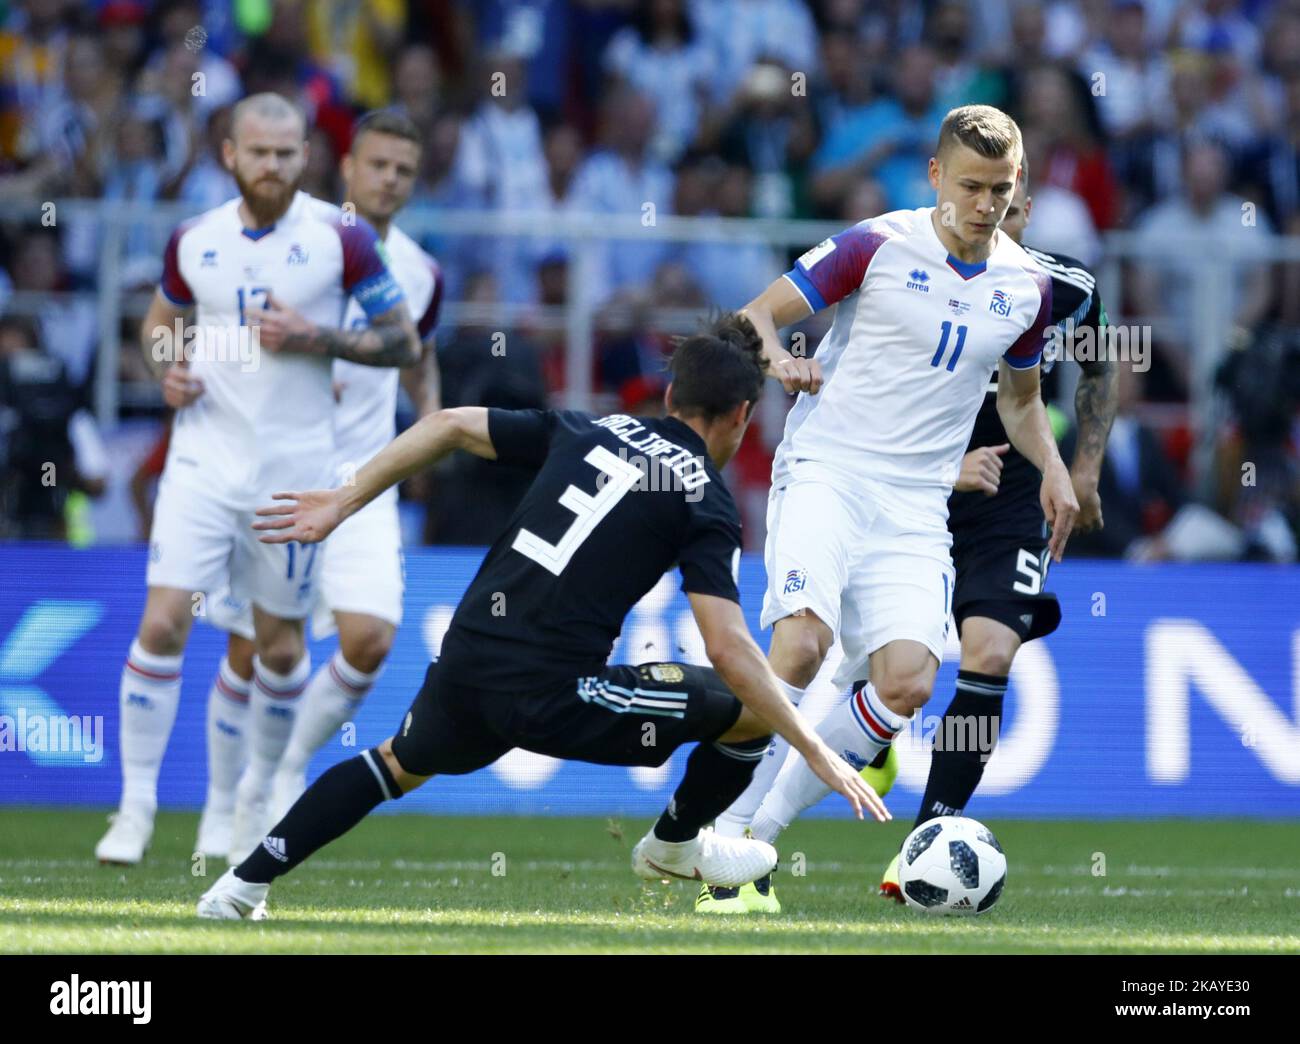 Group D Argetnina v Iceland - FIFA World Cup Russia 2018 Alfred Finnbogason (Iceland) at Spartak Stadium in Moscow, Russia on June 16, 2018. (Photo by Matteo Ciambelli/NurPhoto)  Stock Photo